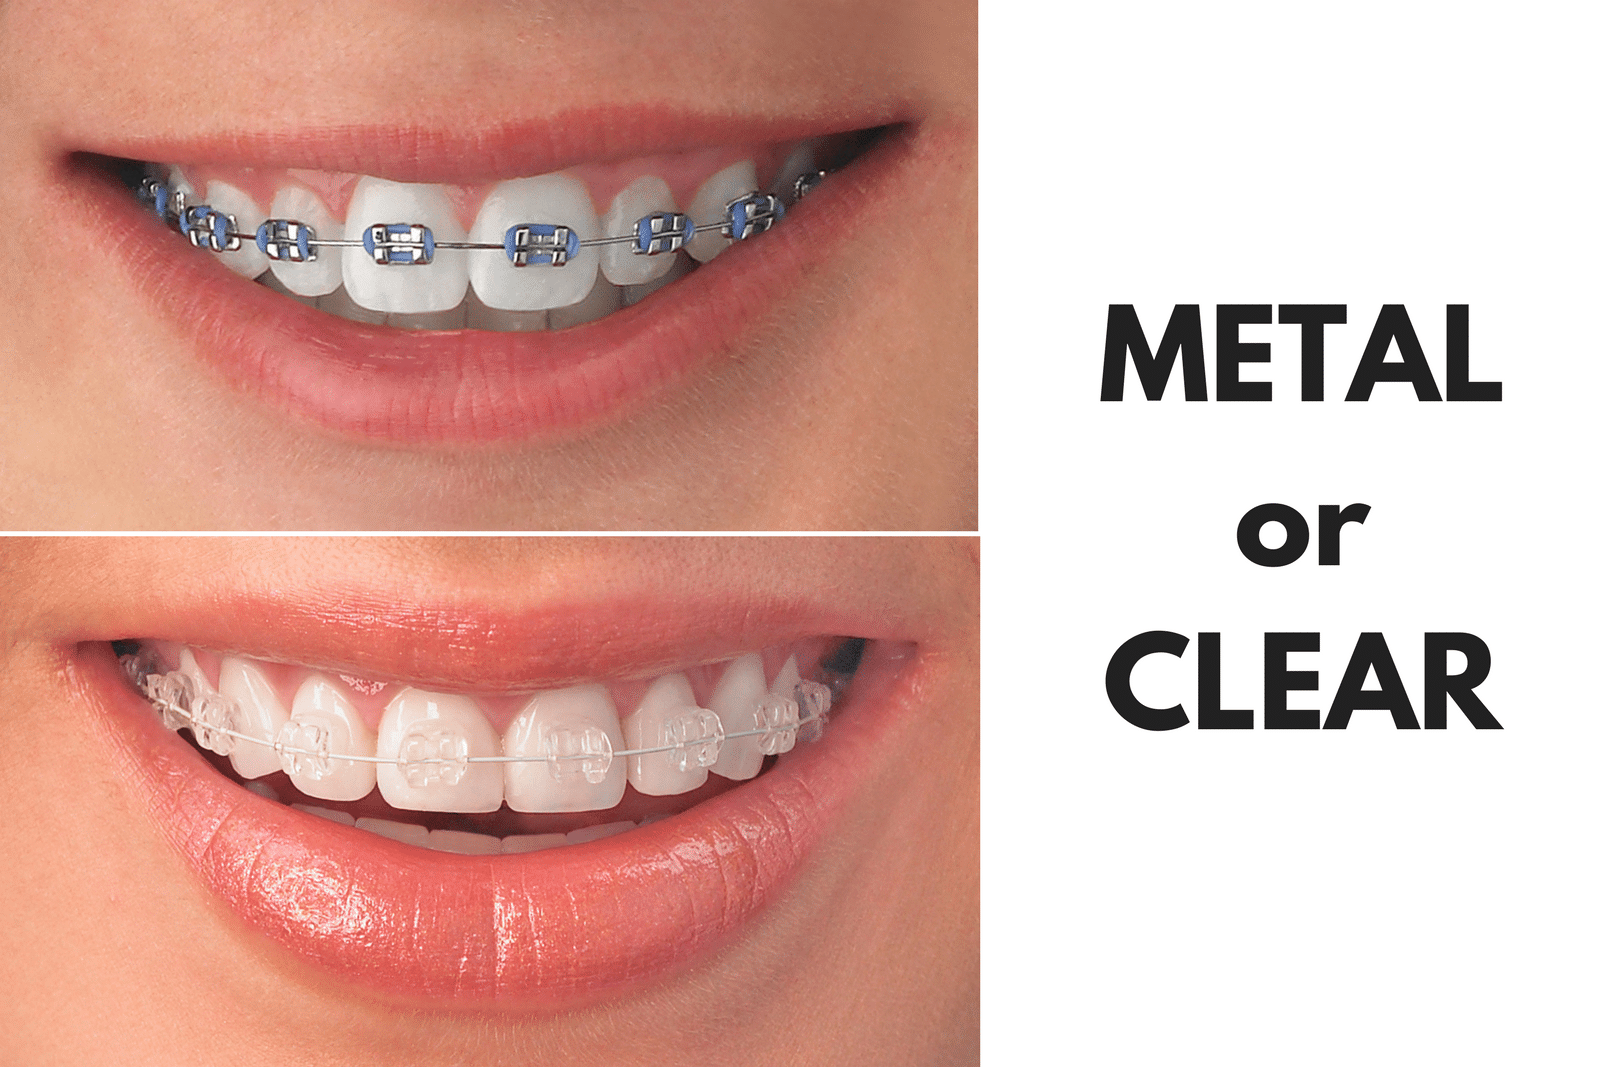 Ask Your Carrollton Dentist: Should I Get Metal or Clear Braces?